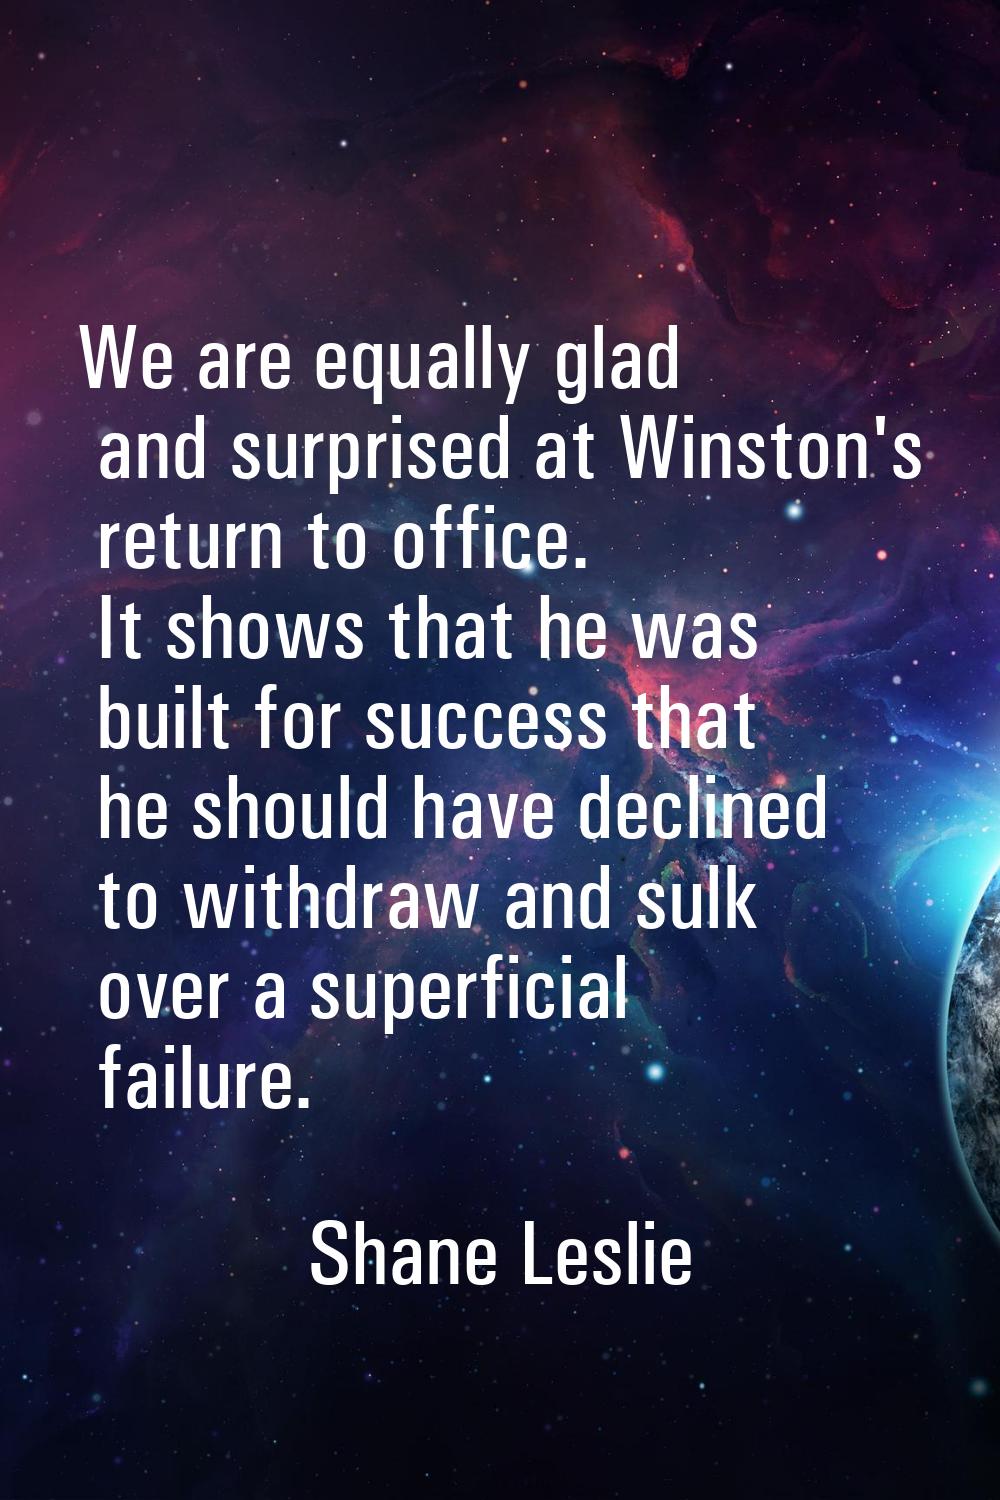 We are equally glad and surprised at Winston's return to office. It shows that he was built for suc